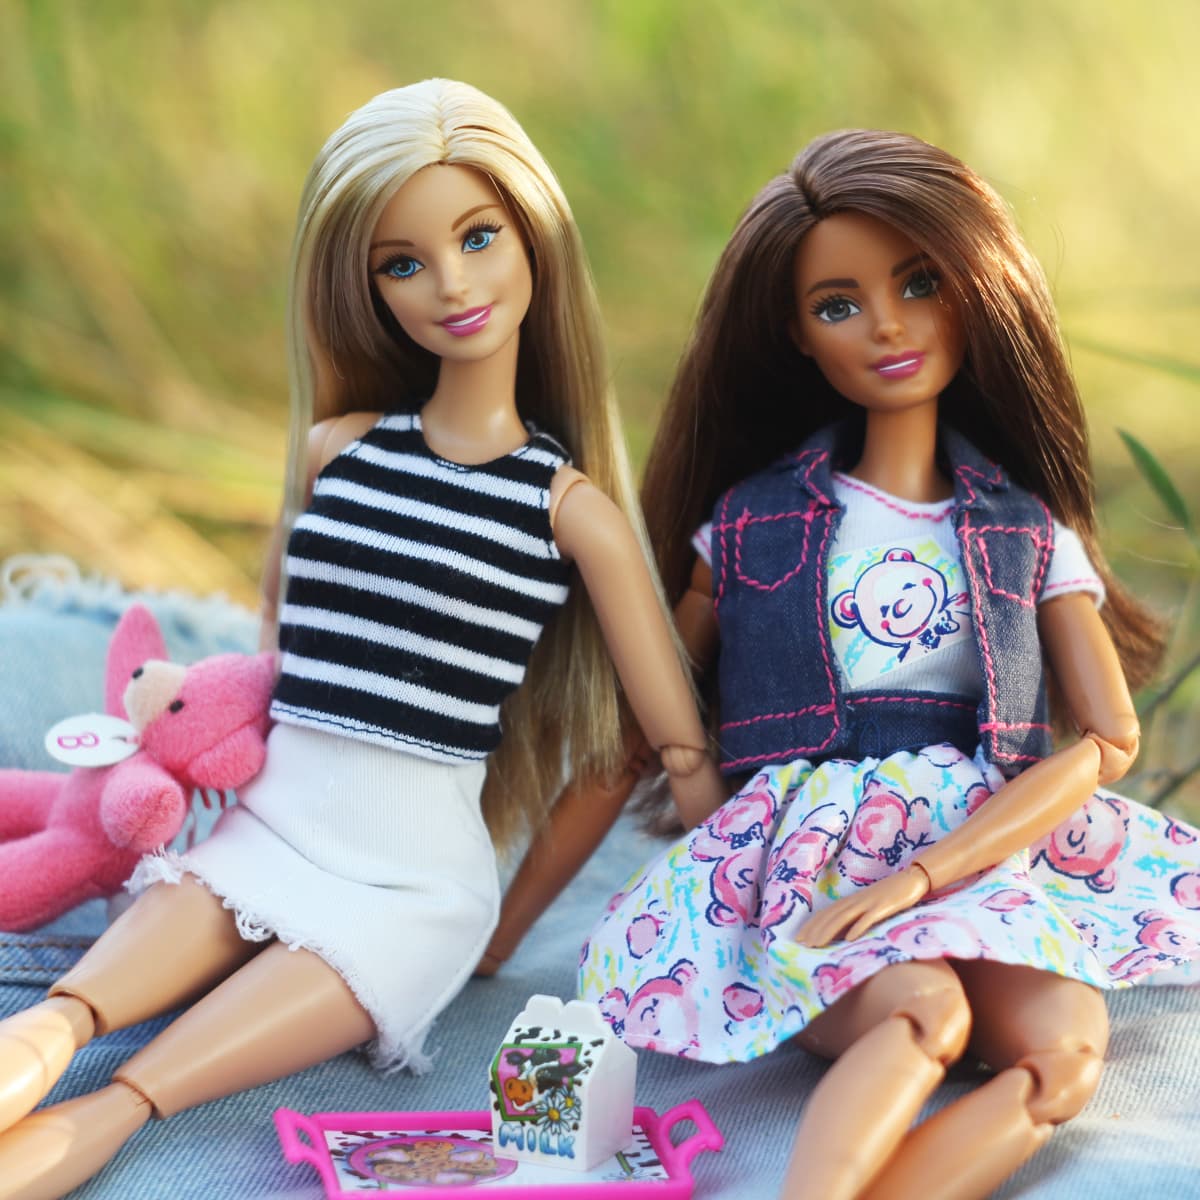 Barbie cafes to open in New York and Chicago